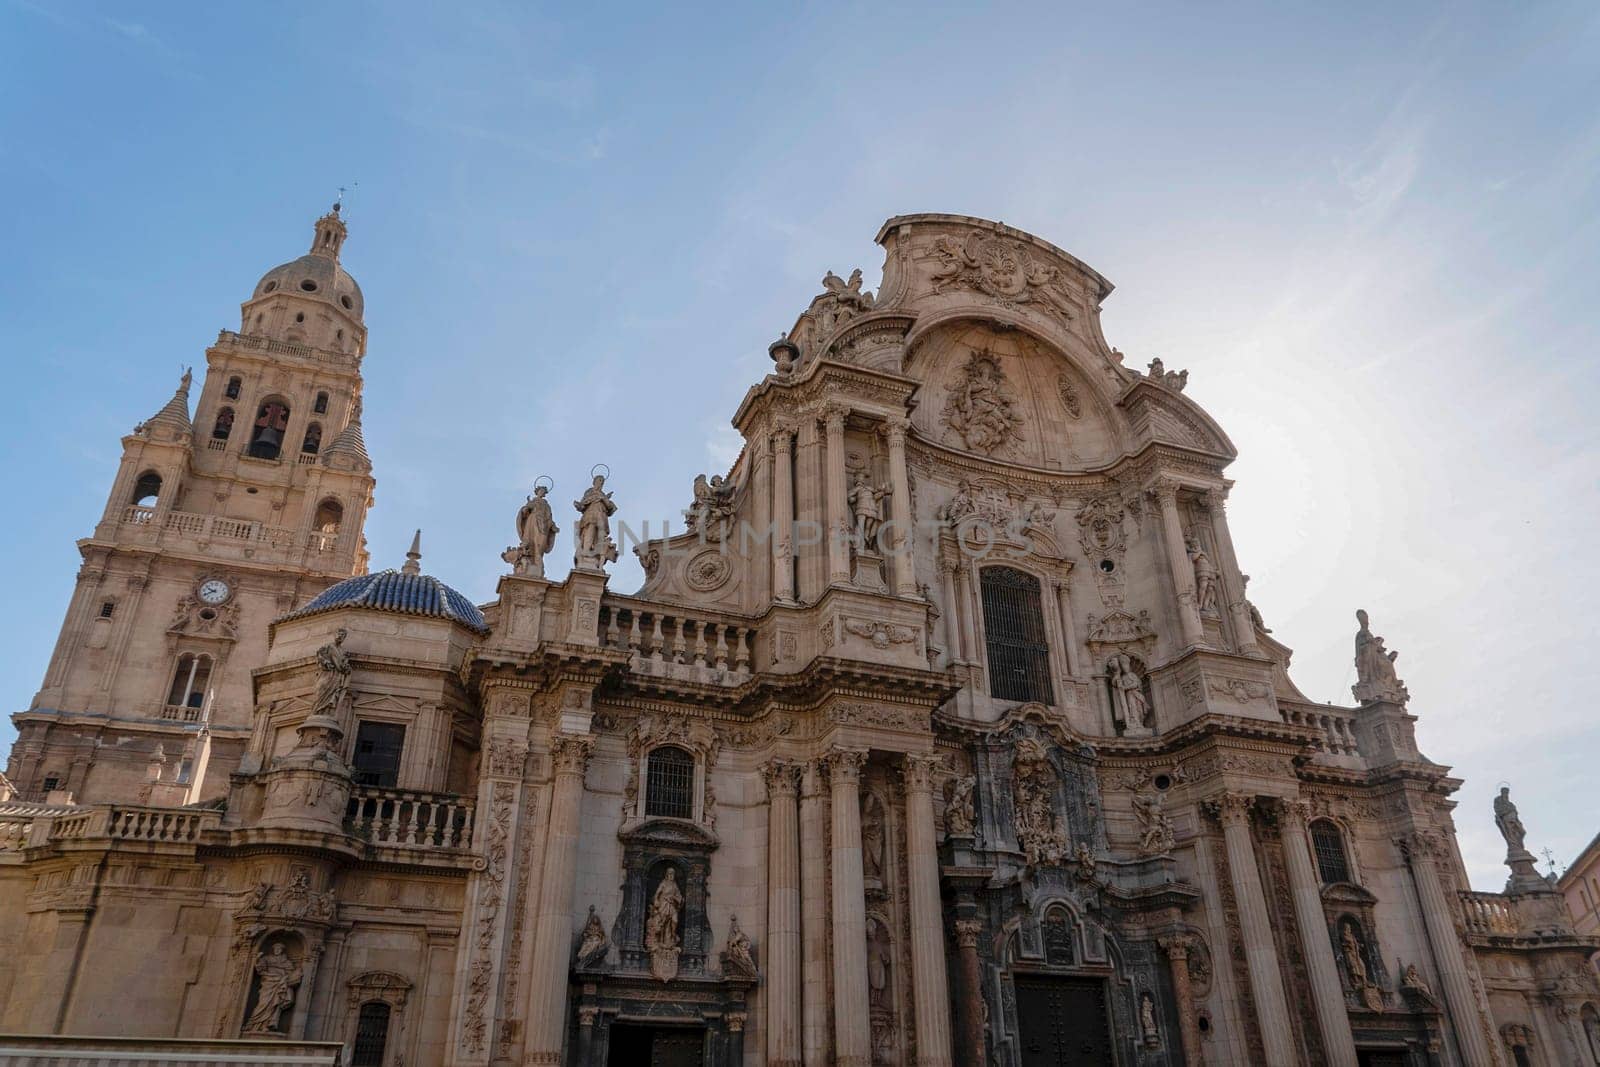 Murcia baroque cathedral spain exterior view